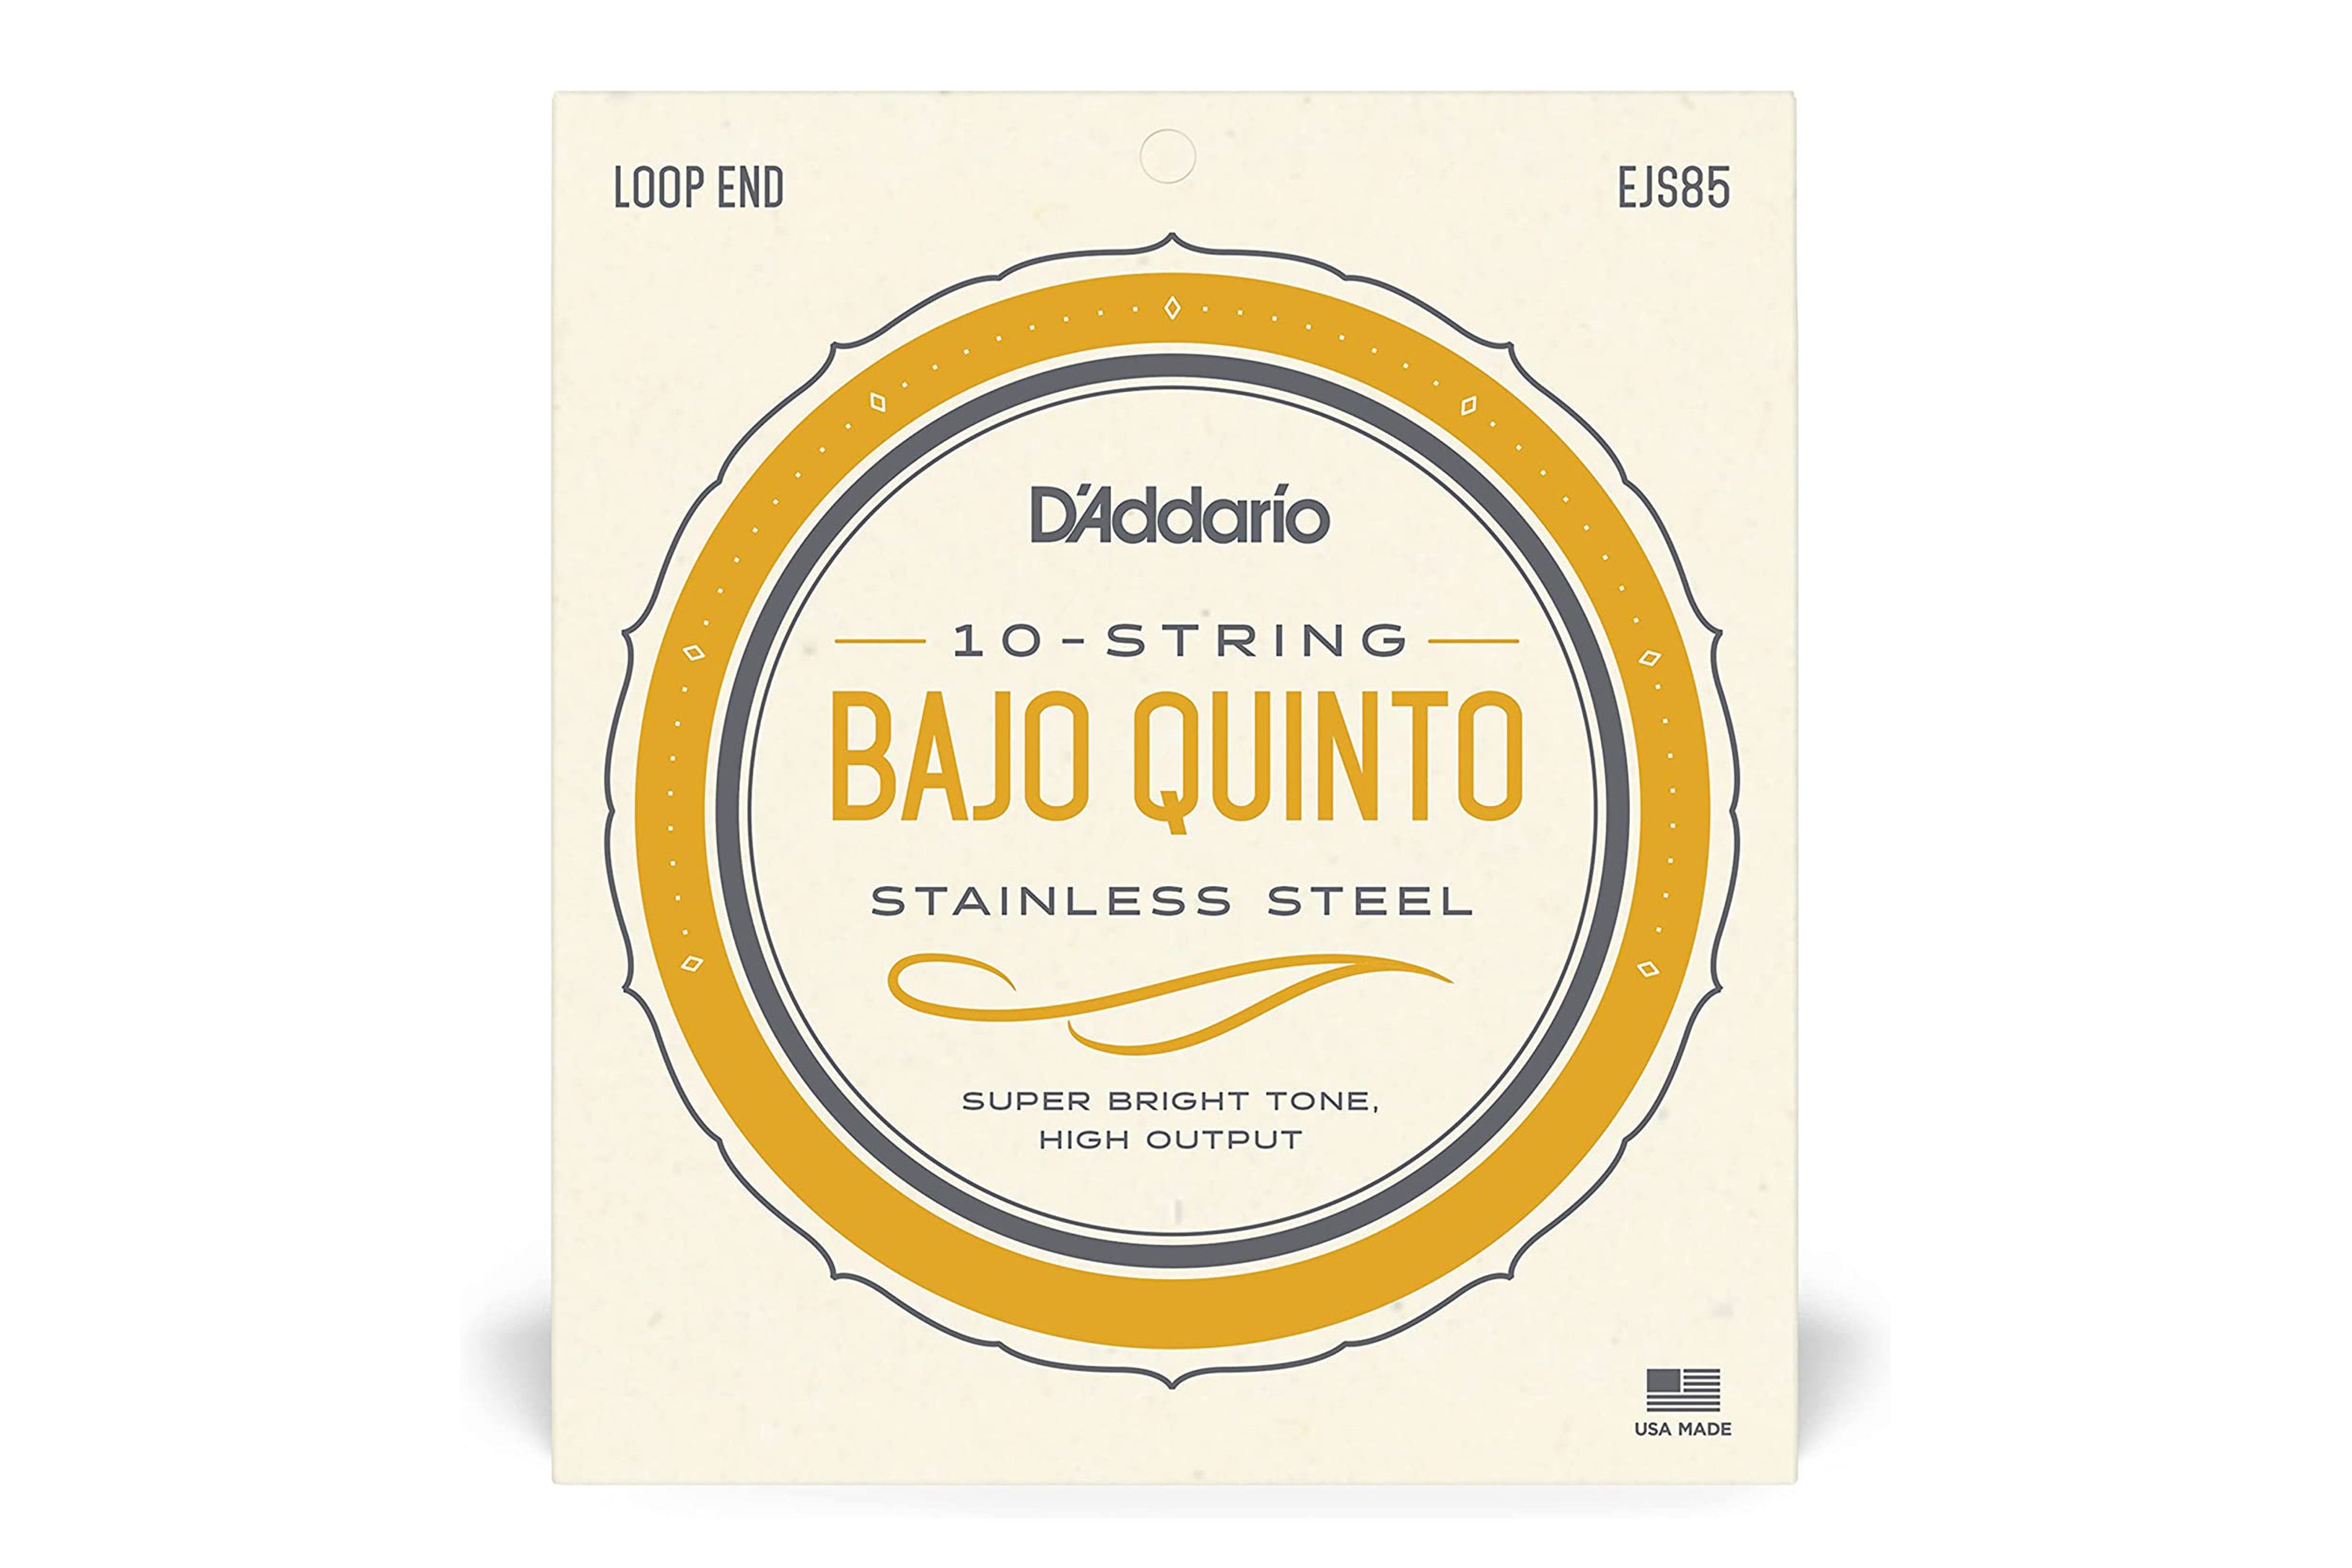 D'Addario EJS85 Stainless Steel 10-String Bajo Quinto Strings - .026-.036